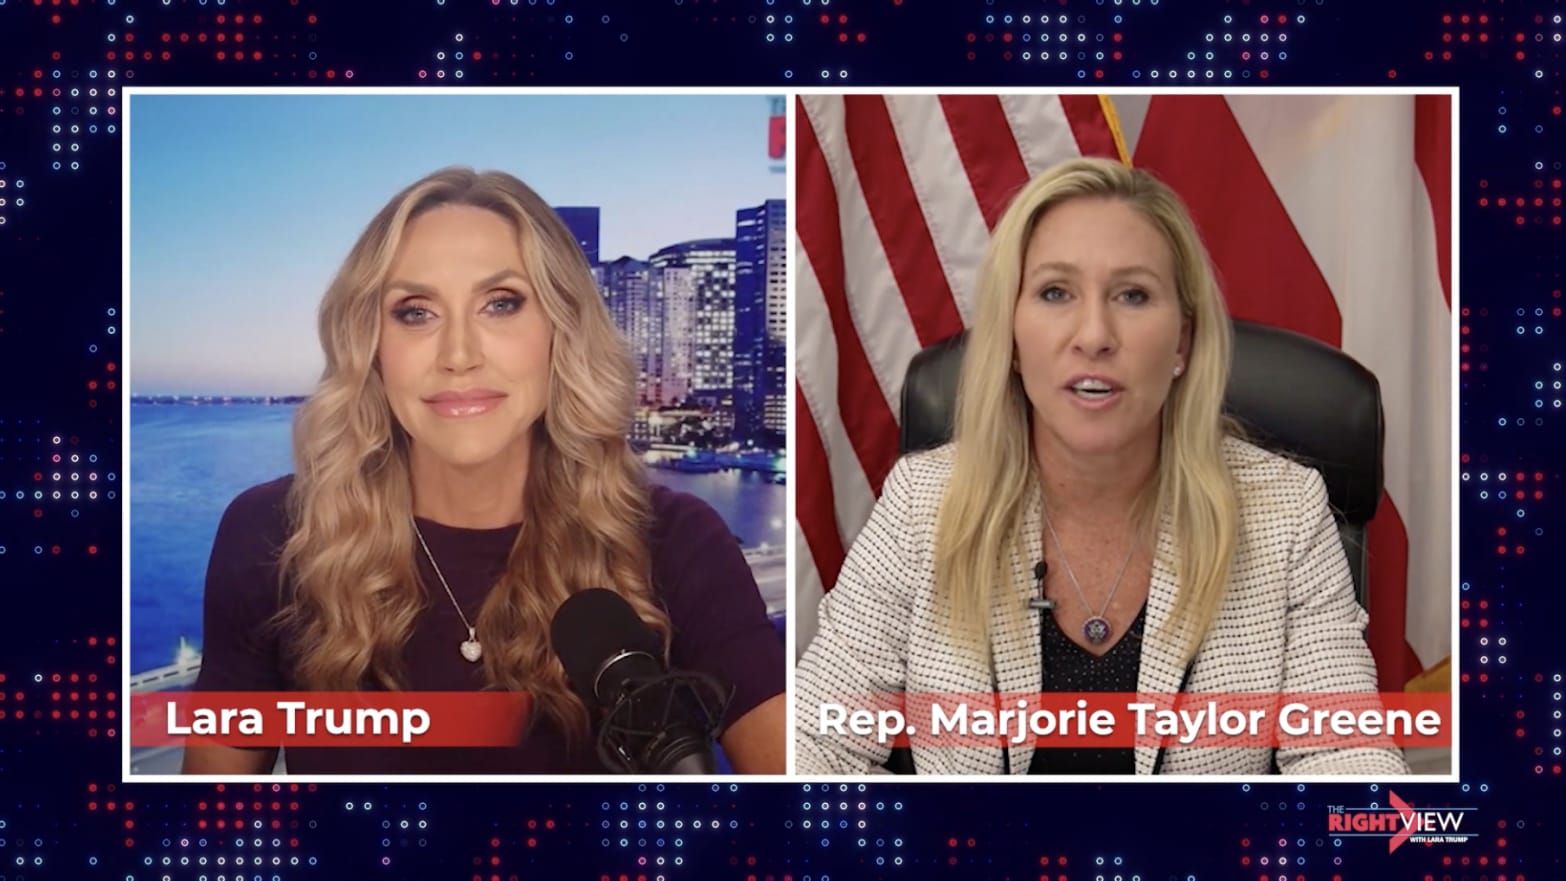 Marjorie Taylor Greene appears in an interview with Lara Trump.